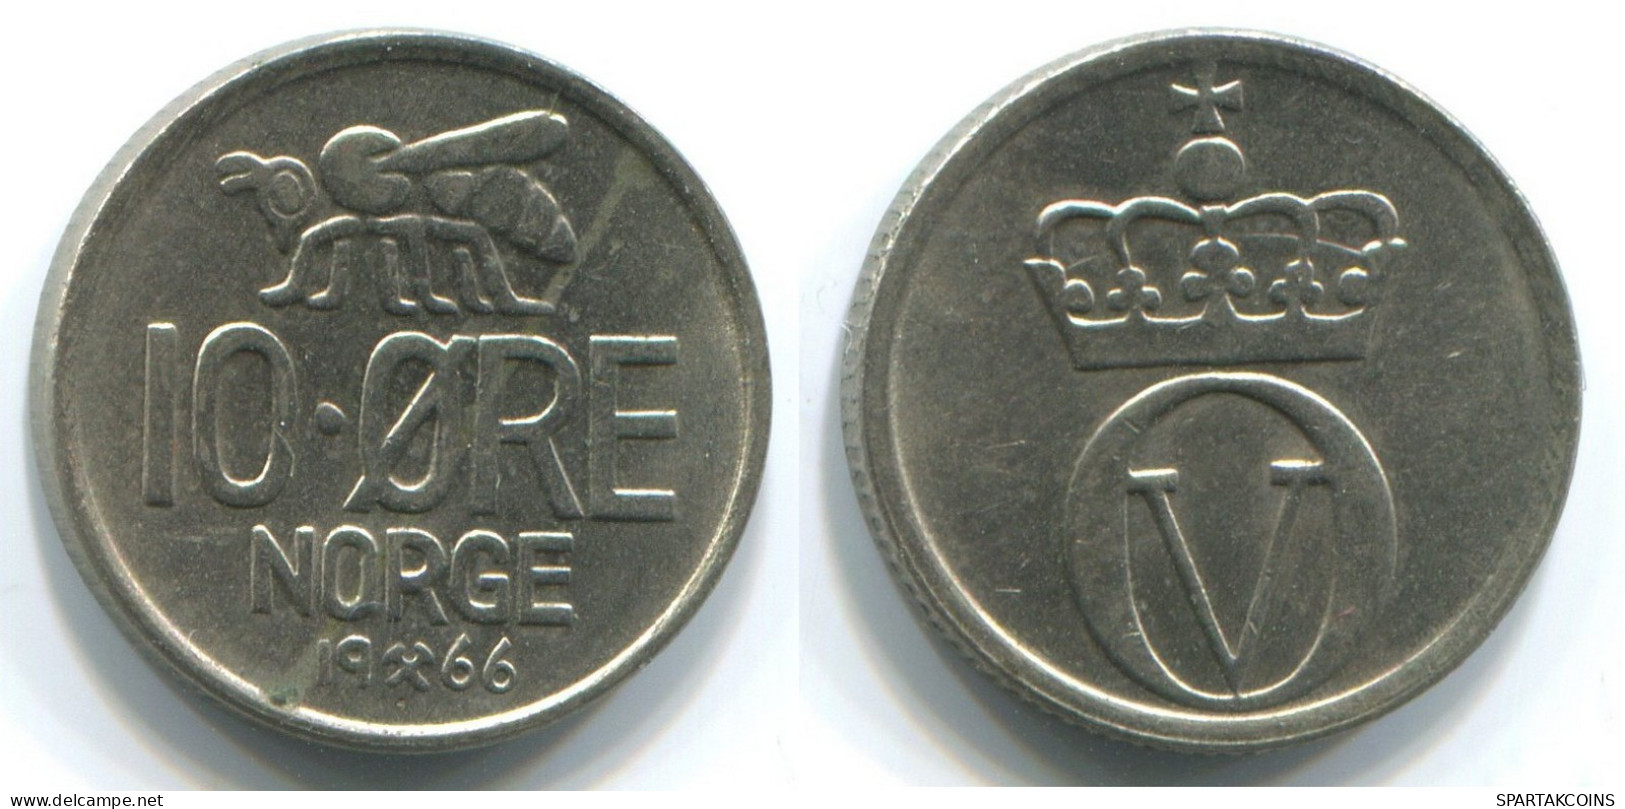 10 ORE 1966 NORWAY Coin #WW1071.U.A - Norway